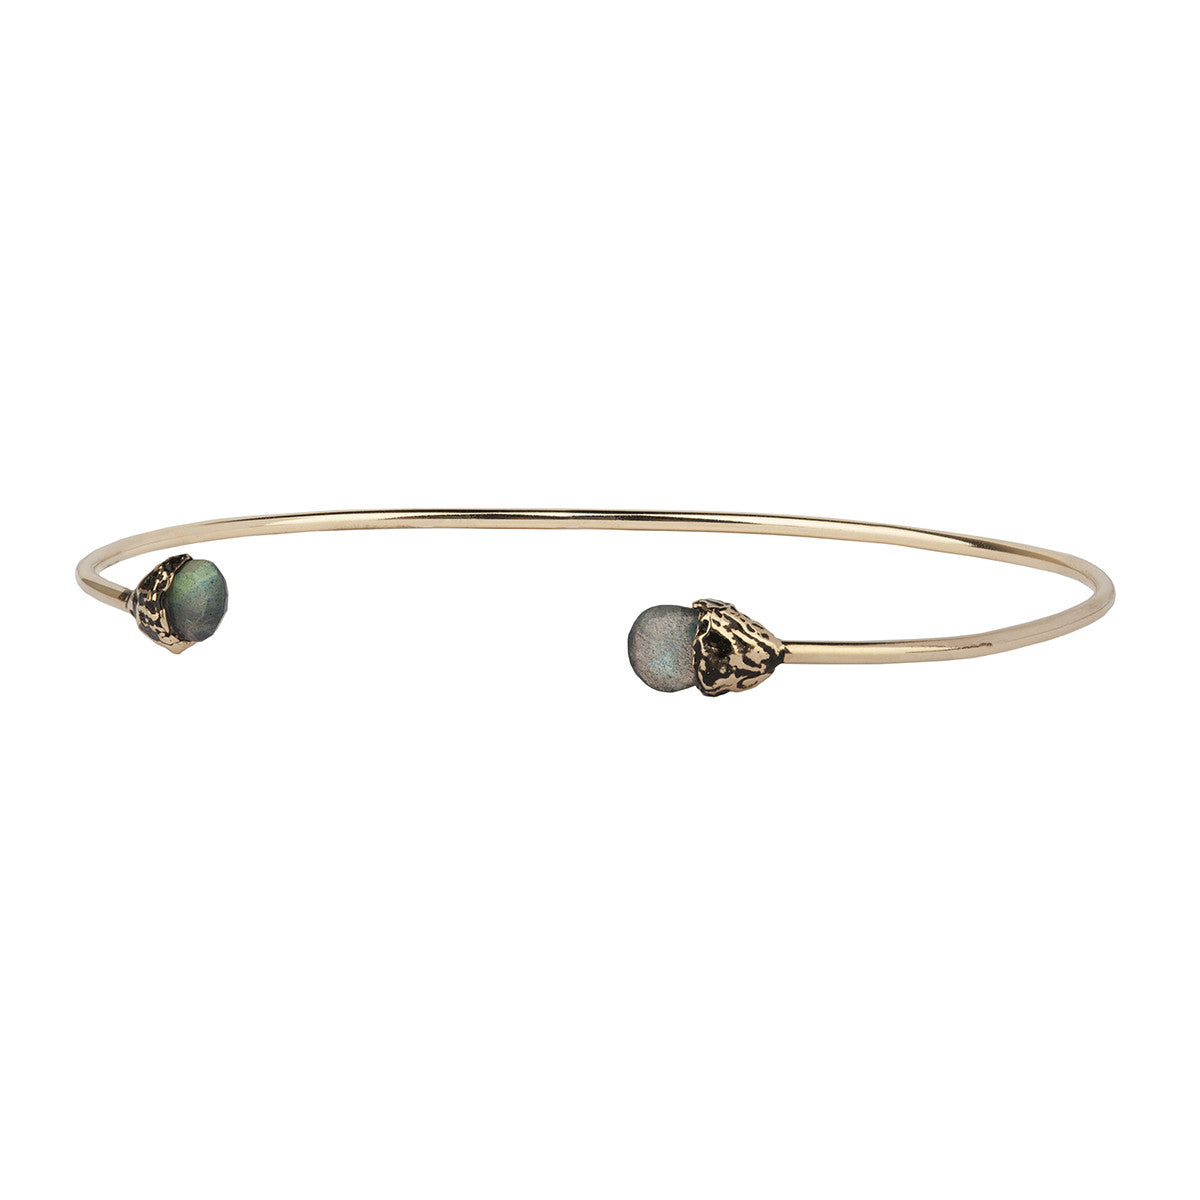 A 14k gold bangle made to hold charms capped with a semi precious stone representing Harmony.